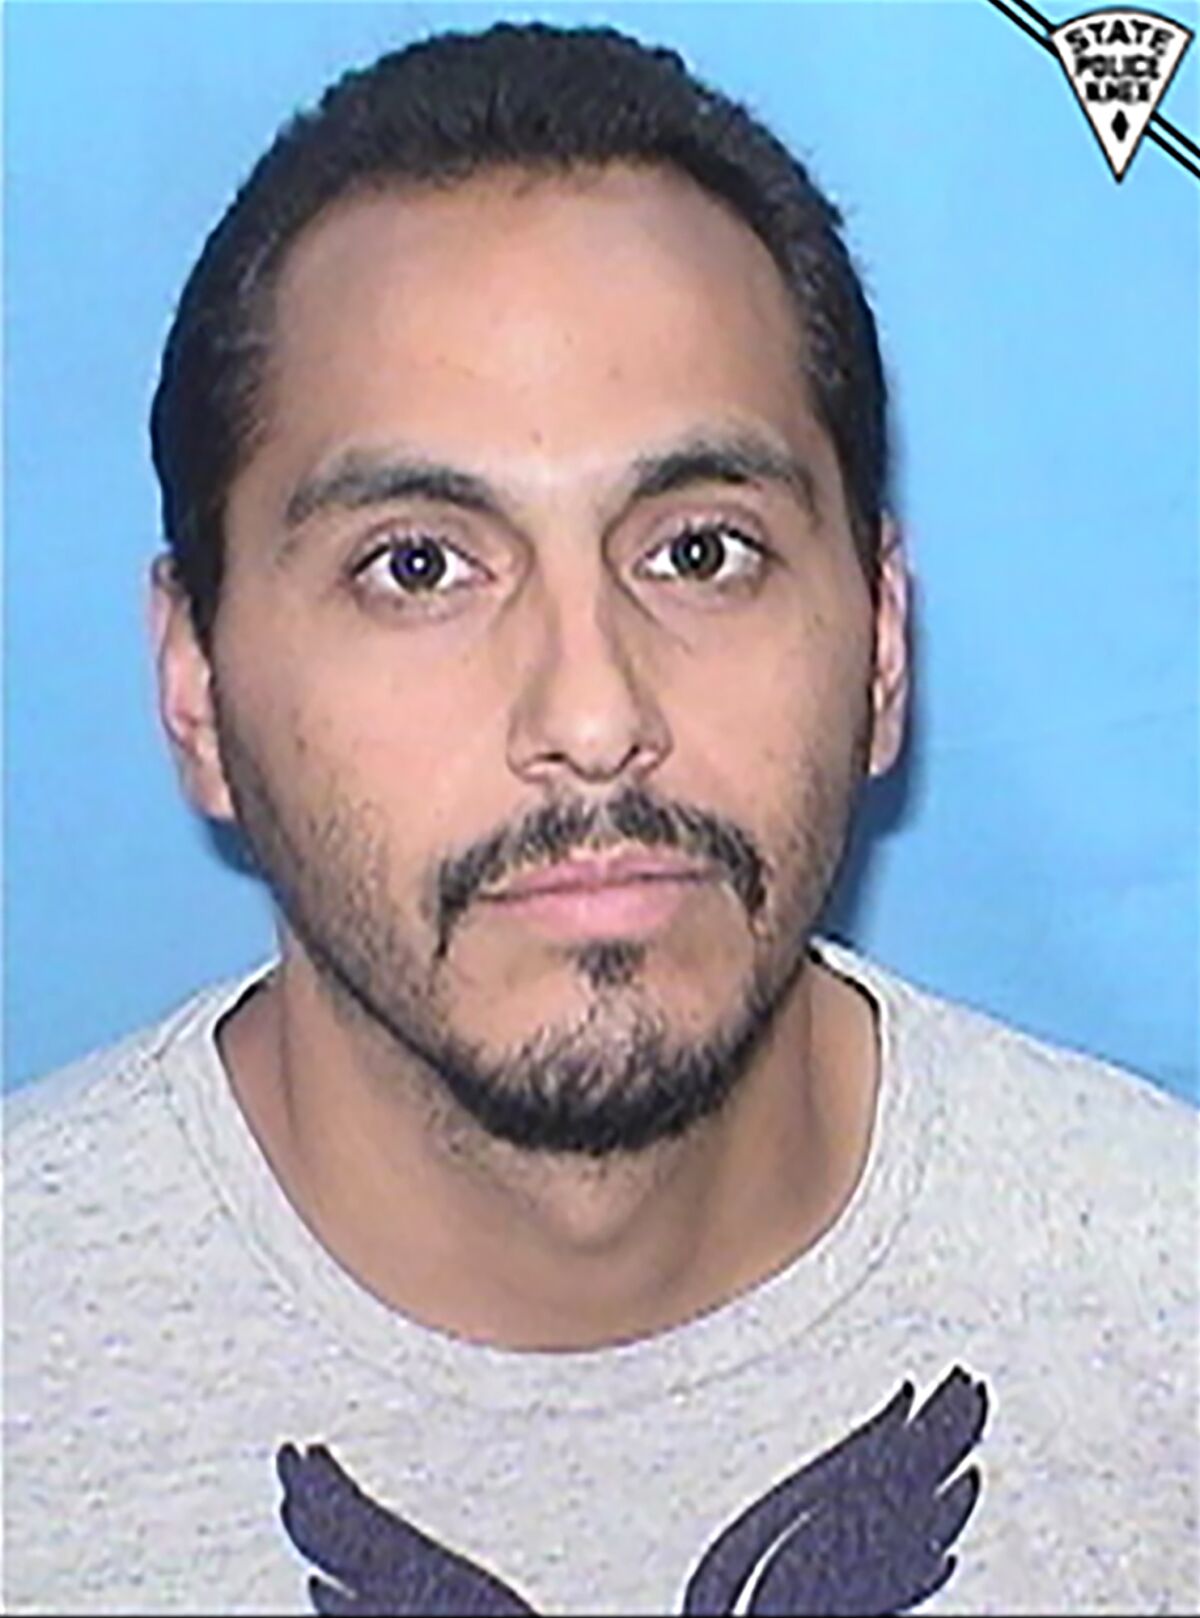 This booking photo released by the New Mexico State Police shows Armando Zamora on Oct. 3, 2021. Zamora, who was on probation, and had to wear an ankle bracelet to monitor his movements, was arrested in the fatal beating of his wife with an ax after authorities used data from the bracelet to find her body in a national forest where the couple went to cut firewood, state police said Wednesday, Oct. 6. (New Mexico State Police via AP)